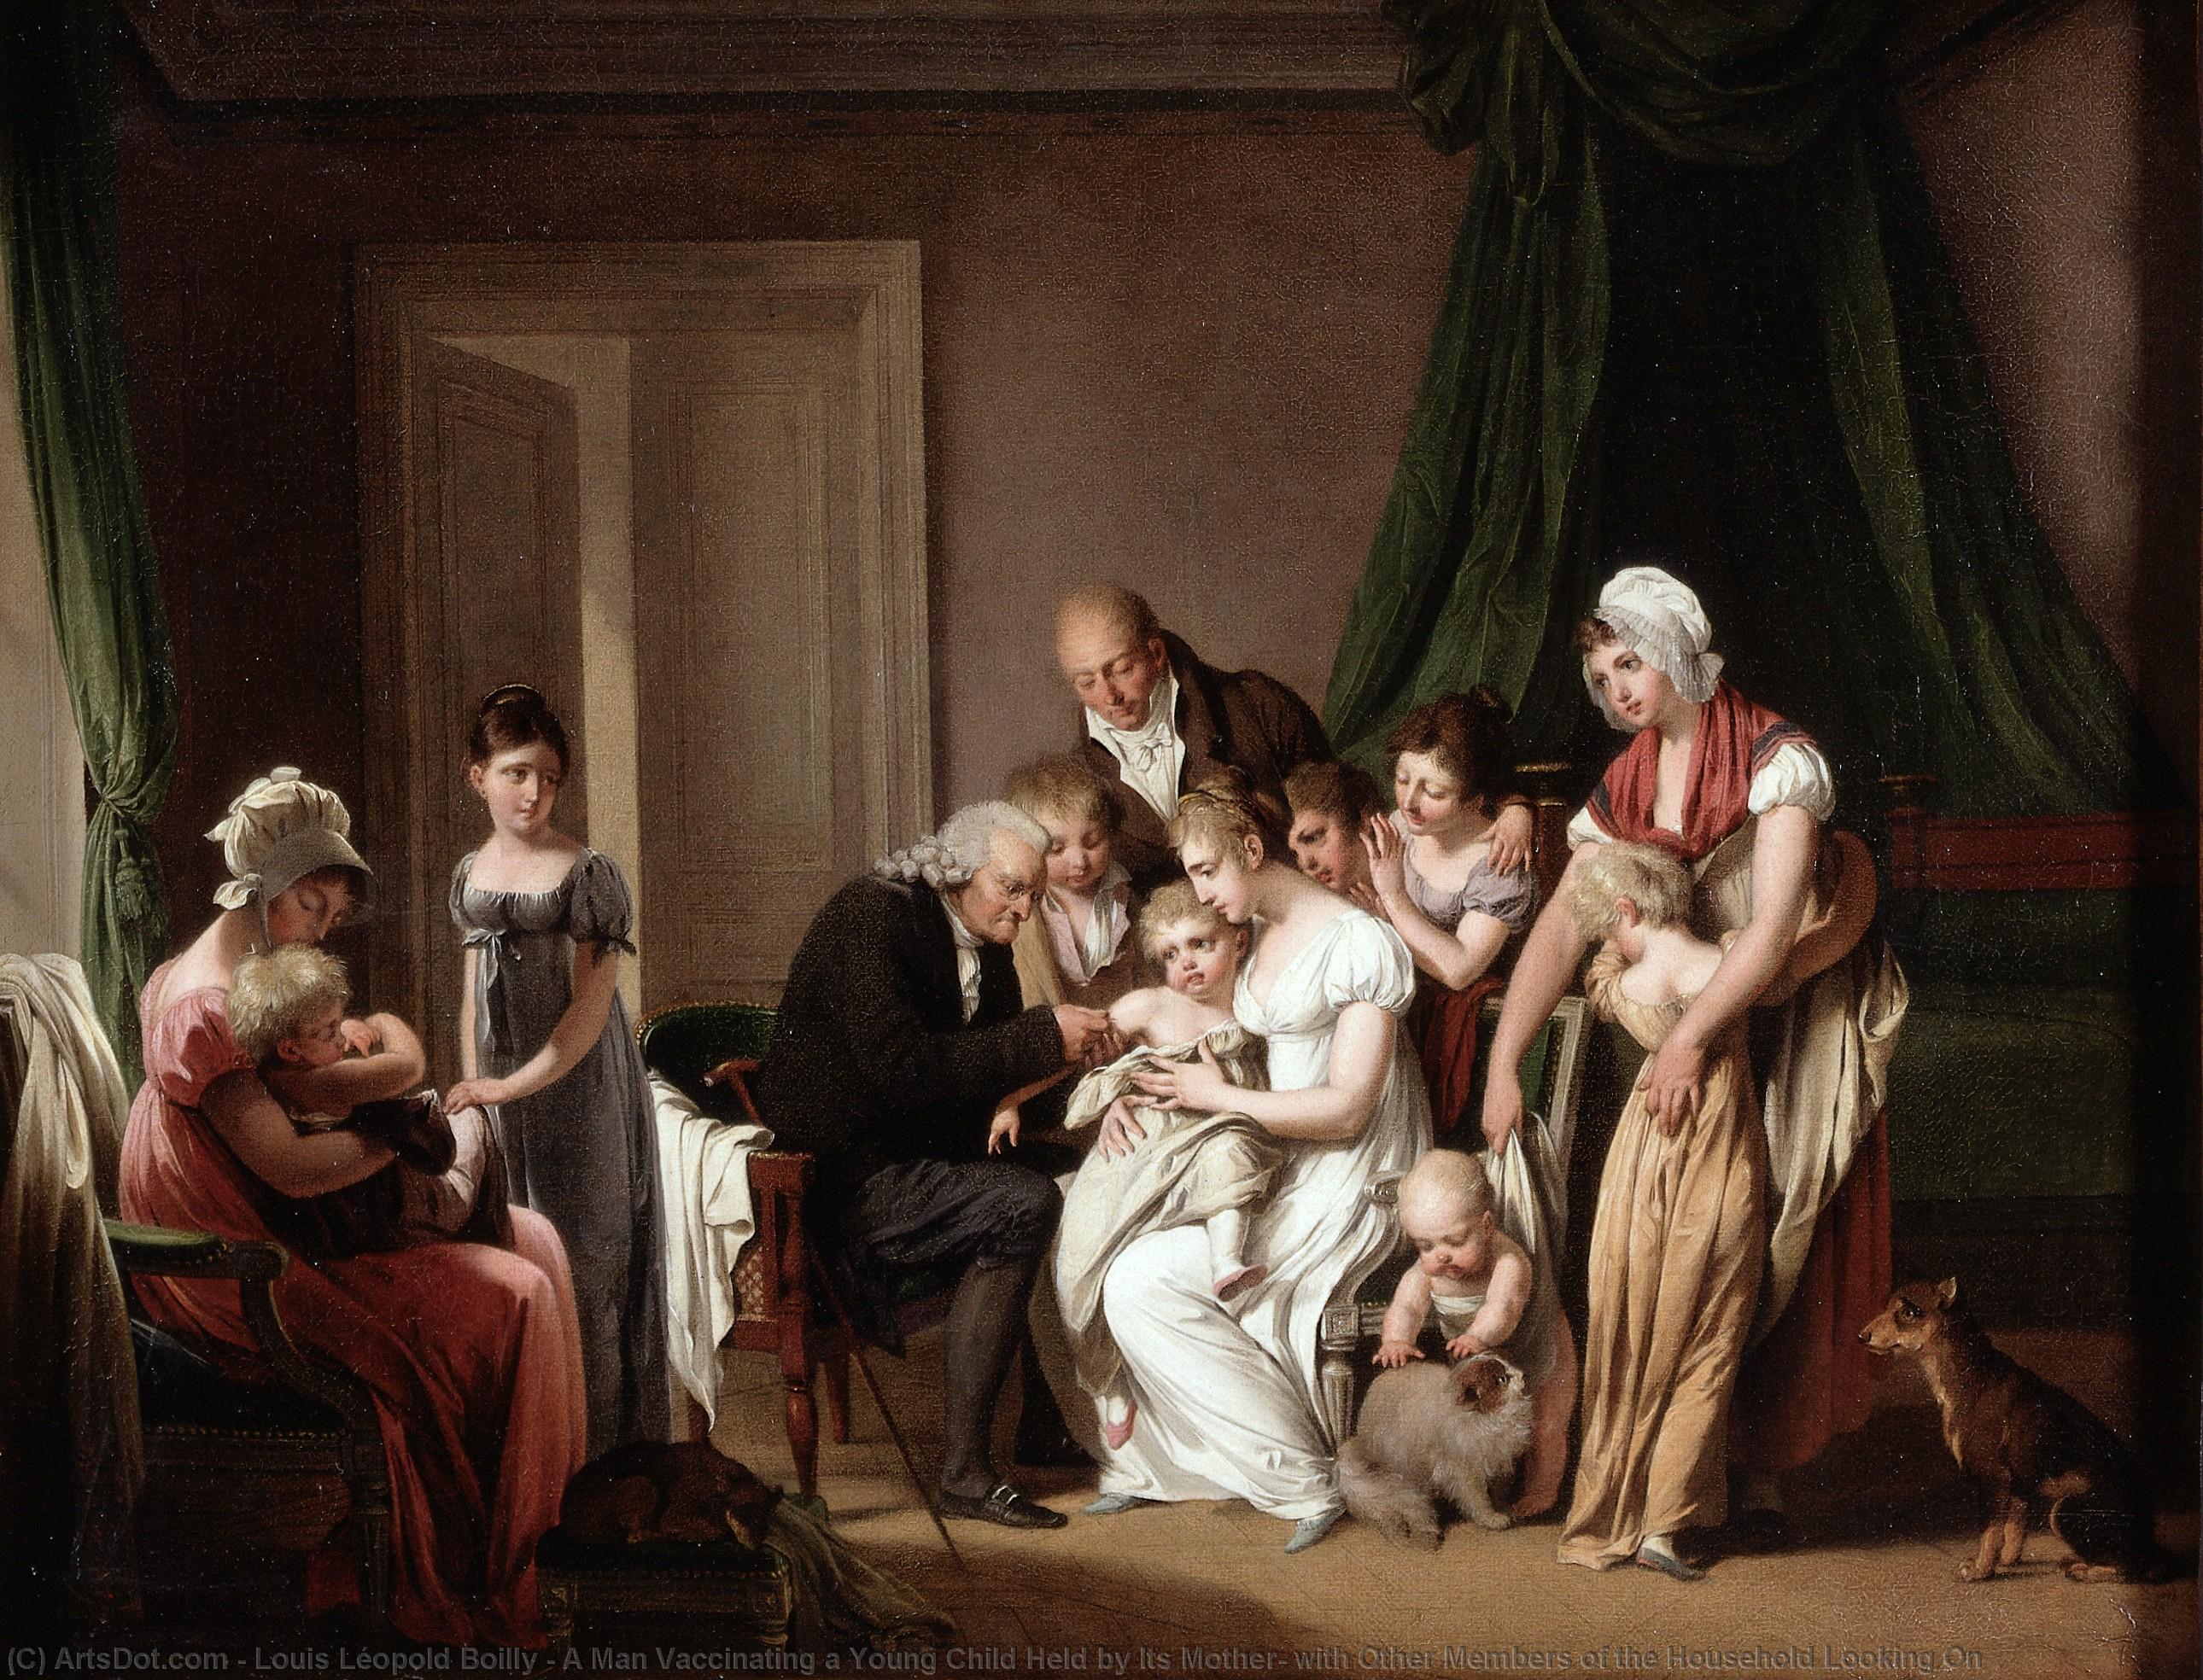 WikiOO.org - Güzel Sanatlar Ansiklopedisi - Resim, Resimler Louis Léopold Boilly - A Man Vaccinating a Young Child Held by Its Mother, with Other Members of the Household Looking On